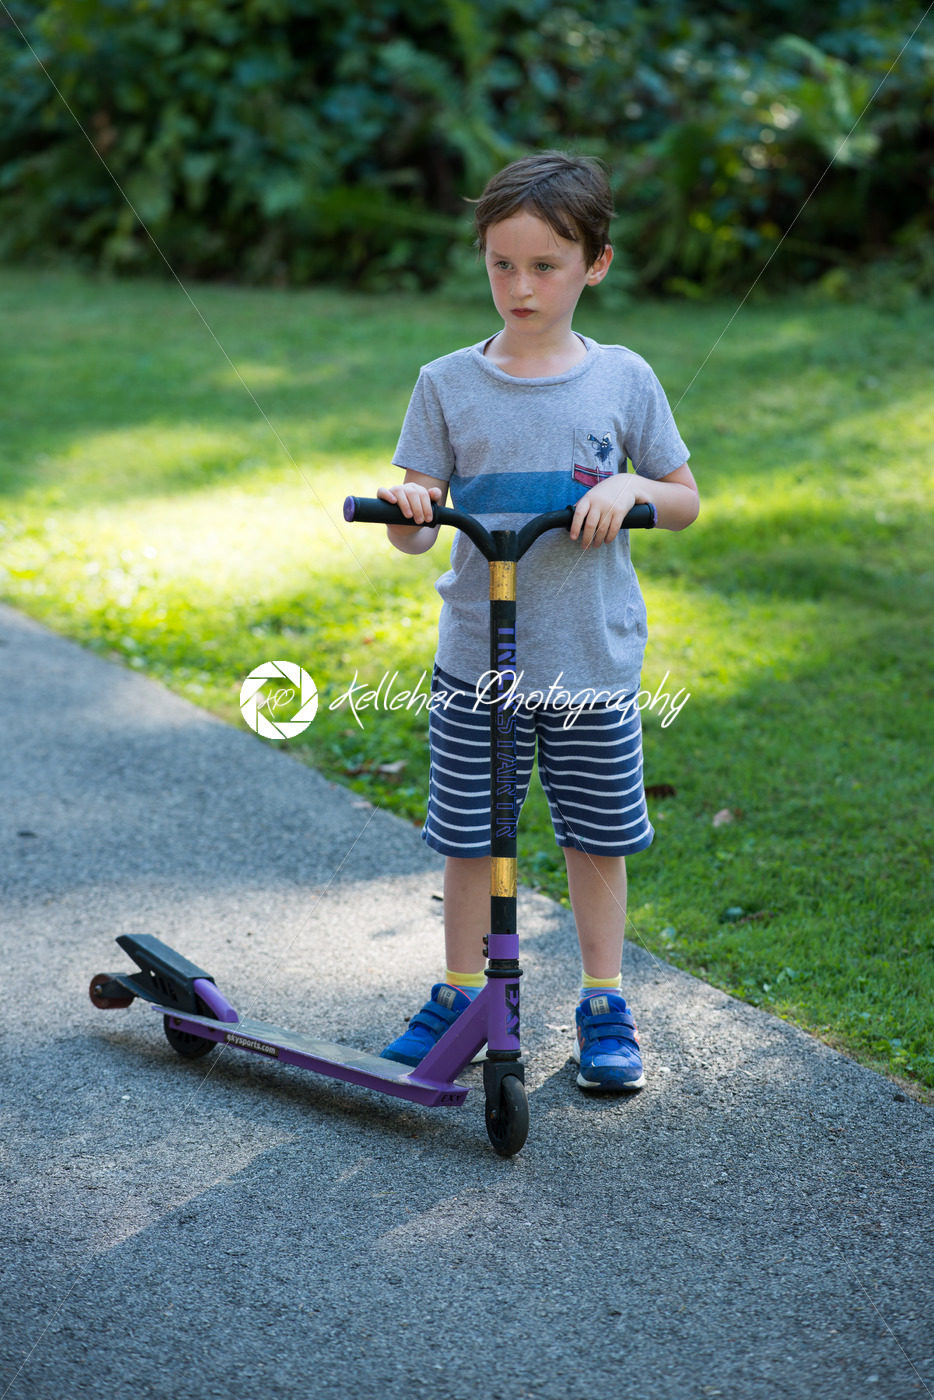 Young litte boy outside riding his scooter in the driveway - Kelleher Photography Store